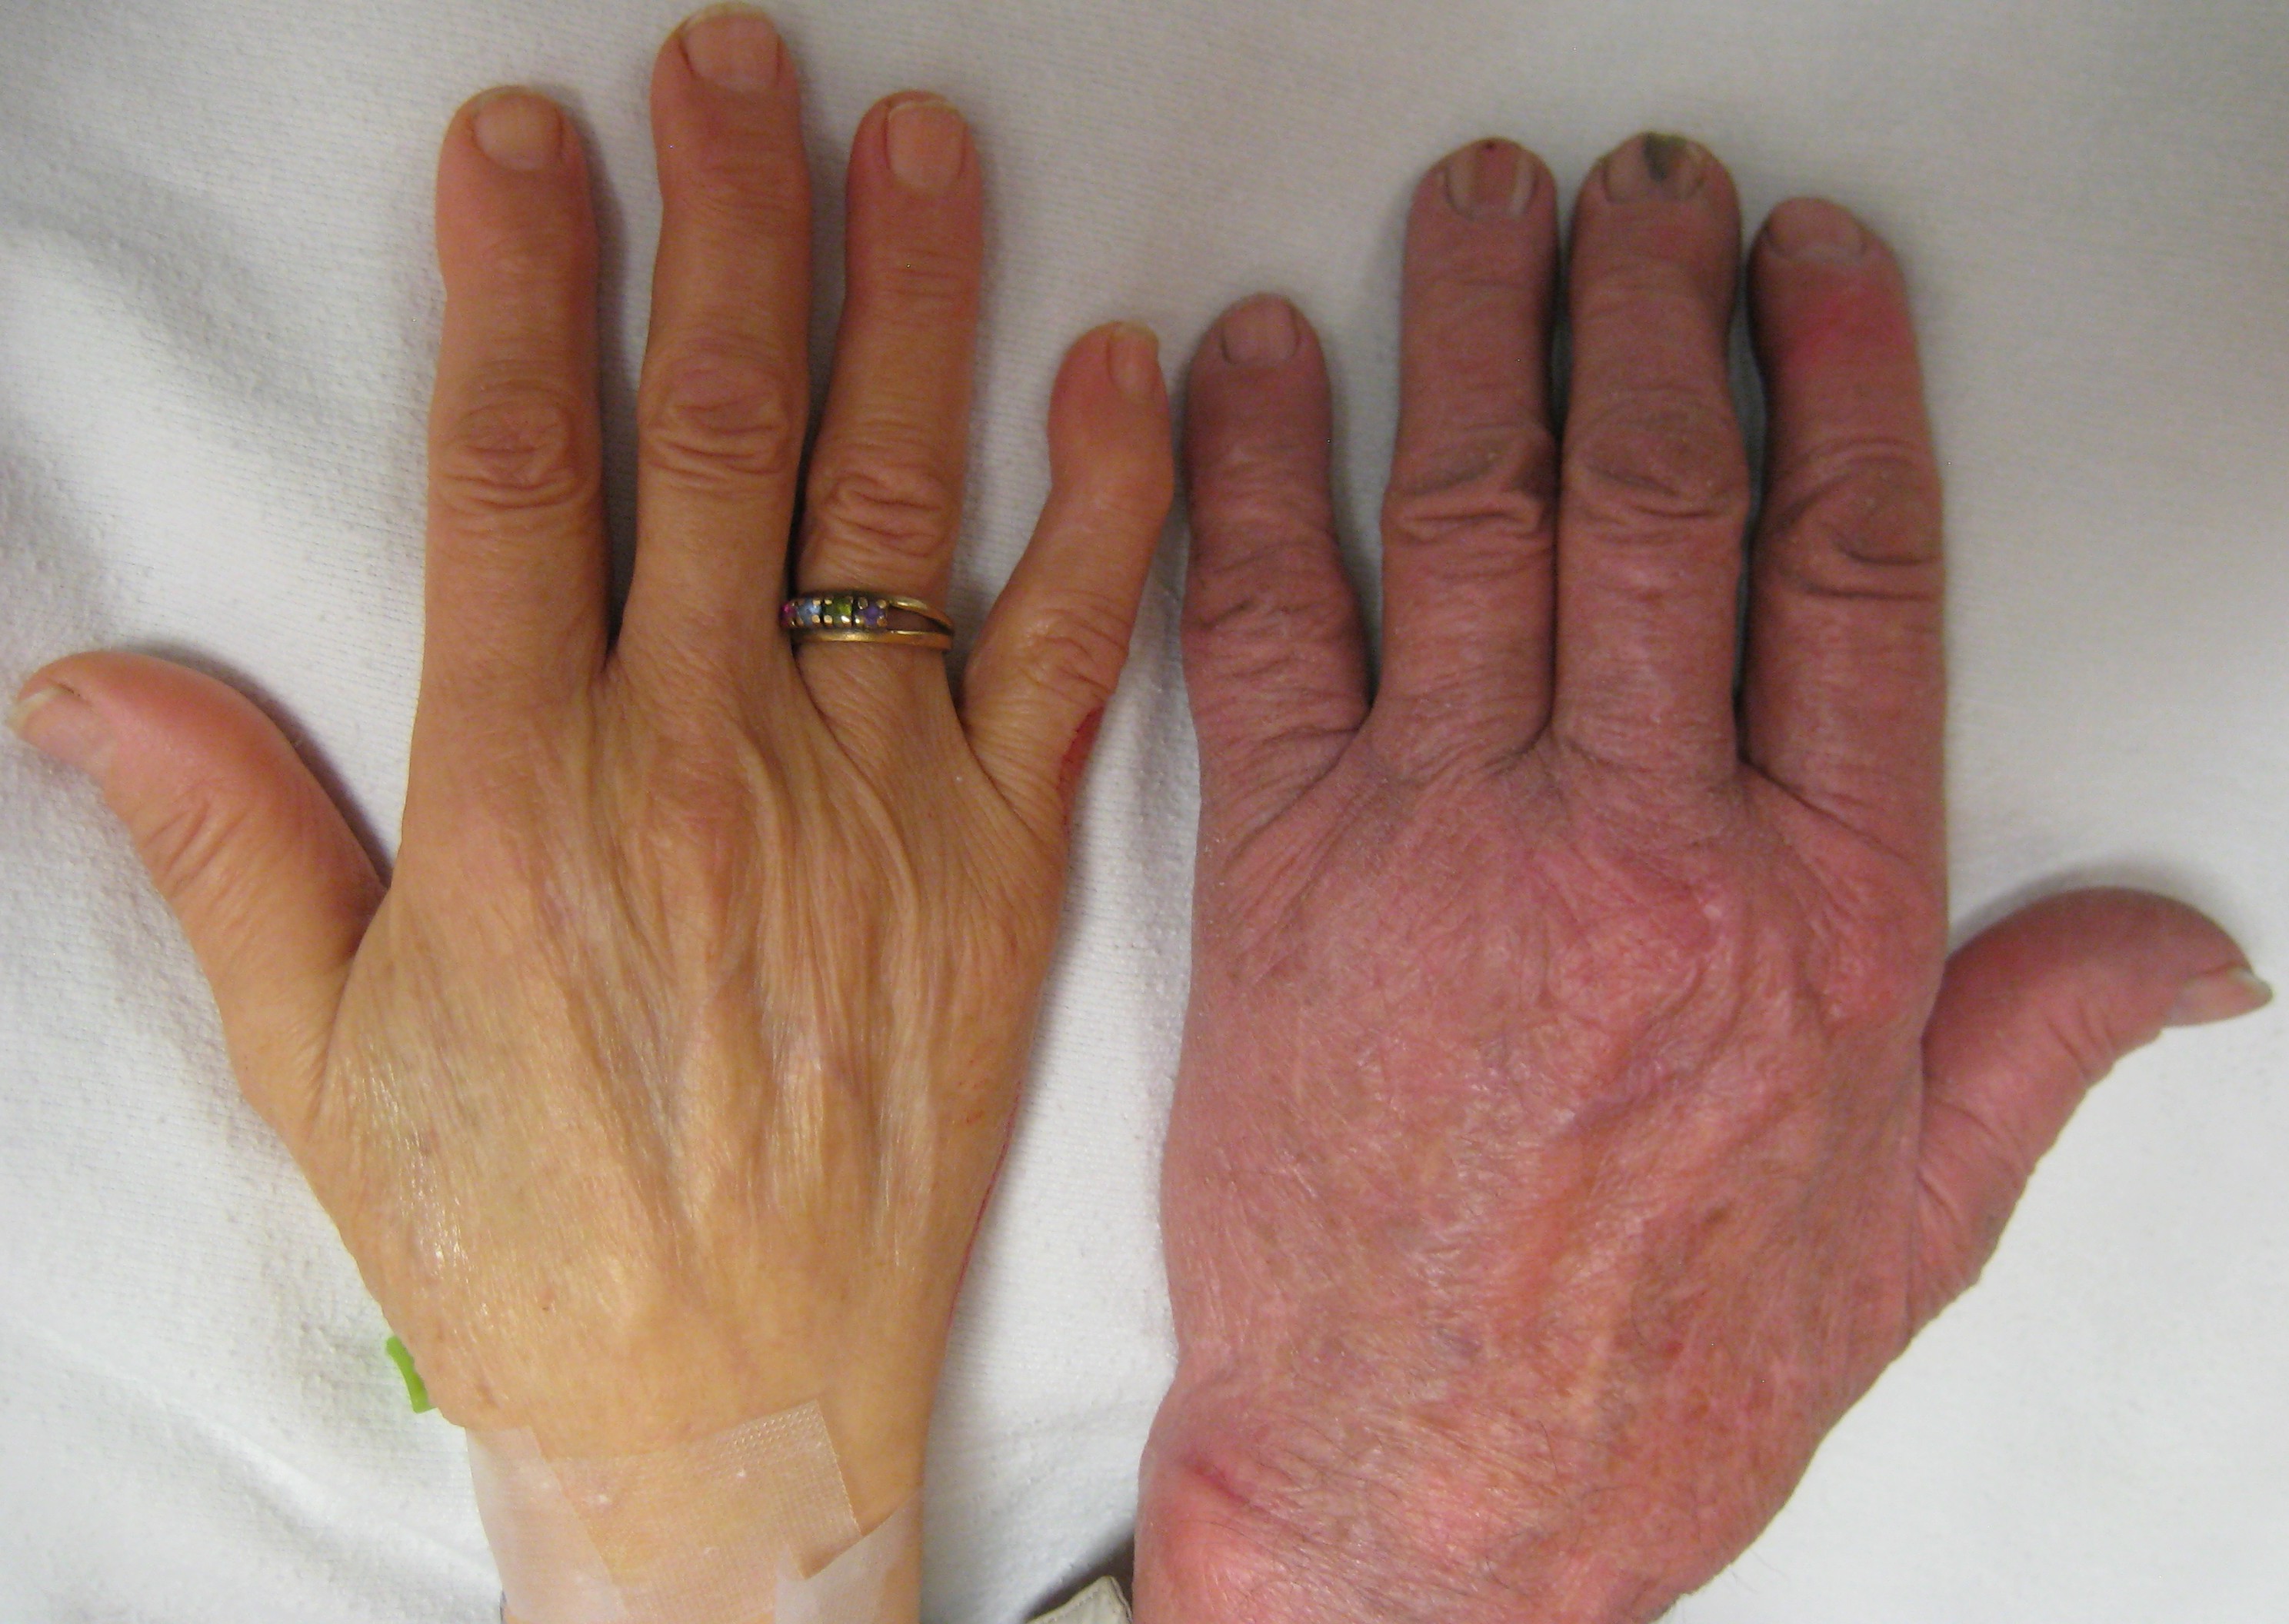 The hand of a person with severe anemia (on the left) compared to one without (on the right)By James Heilman, MD - Own work[4]